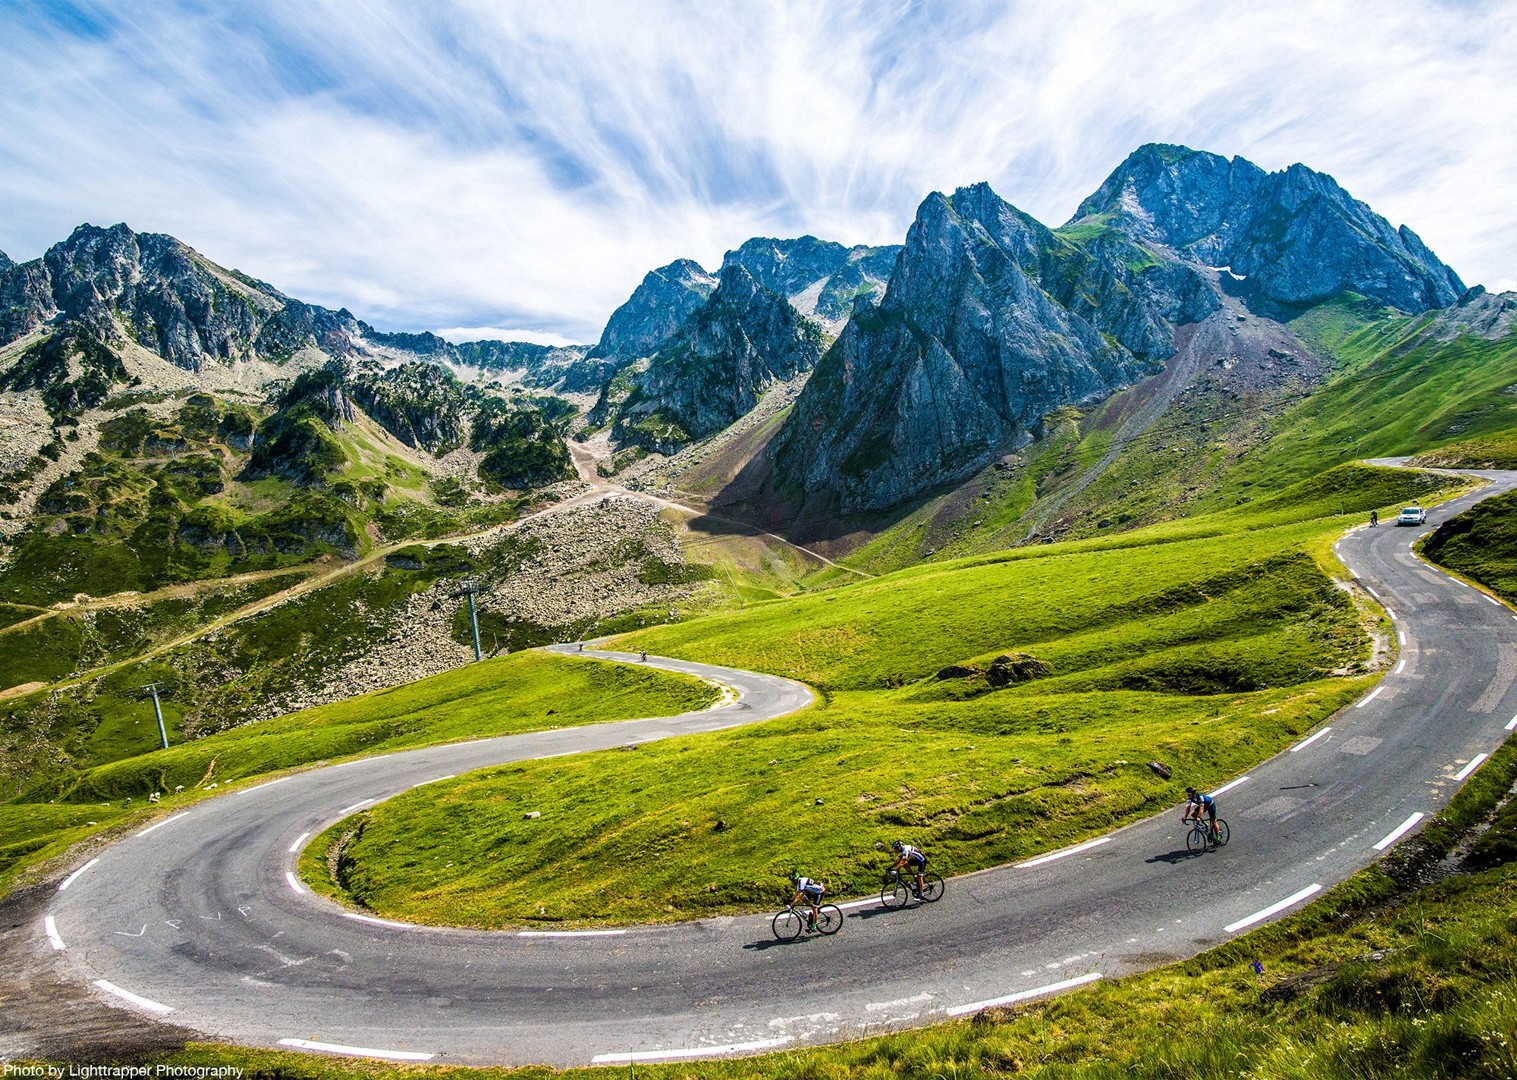 Guided Road Cycling Holiday - Trans Pyrenees Challenge - France Saddle